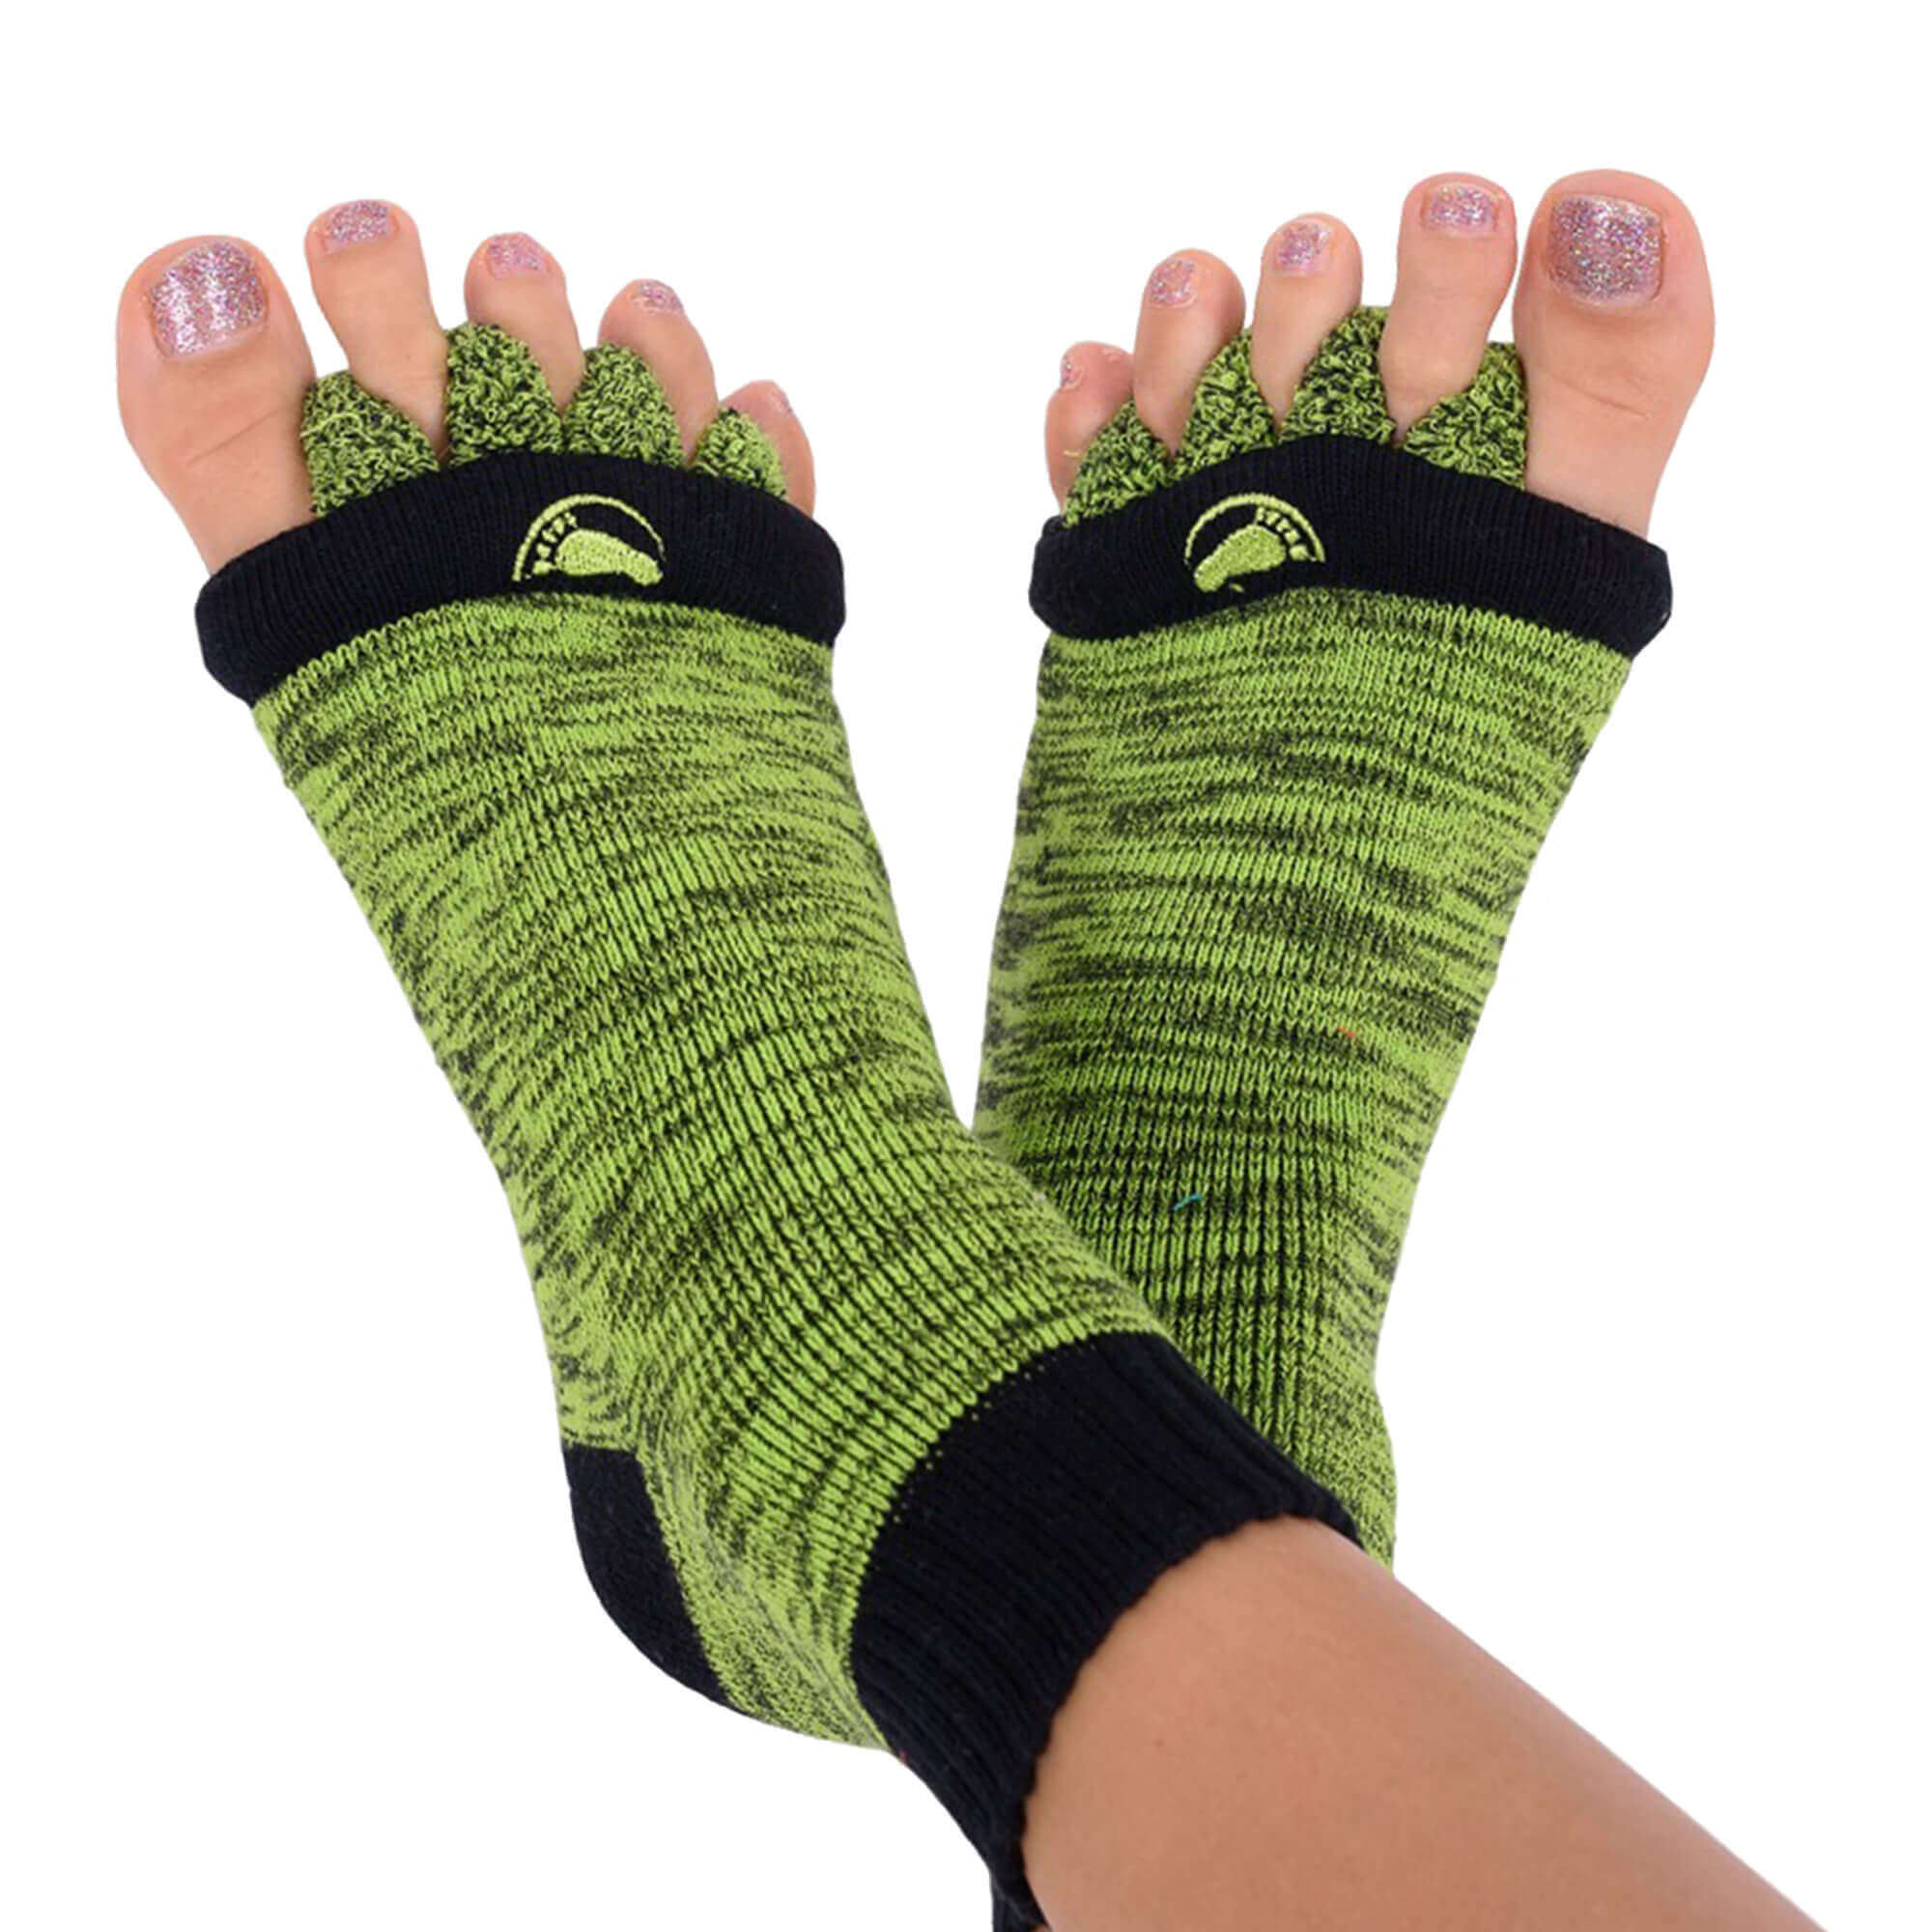 SUNSIOM Comfy Toes Foot Alignment Socks Relief for bunions hammer toes  cramps happy feet 